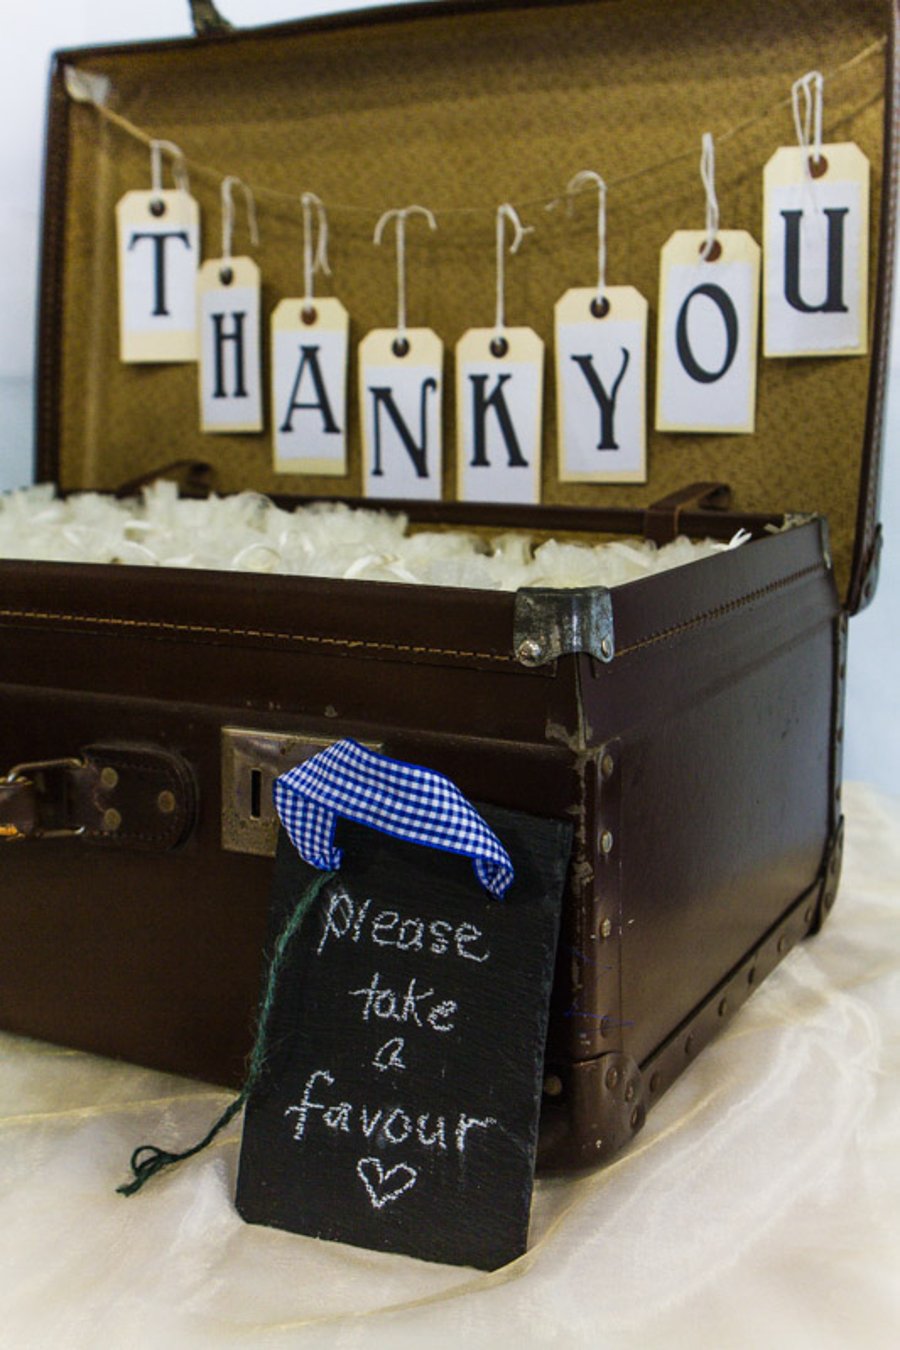 Thank you banner, luggage tag banner